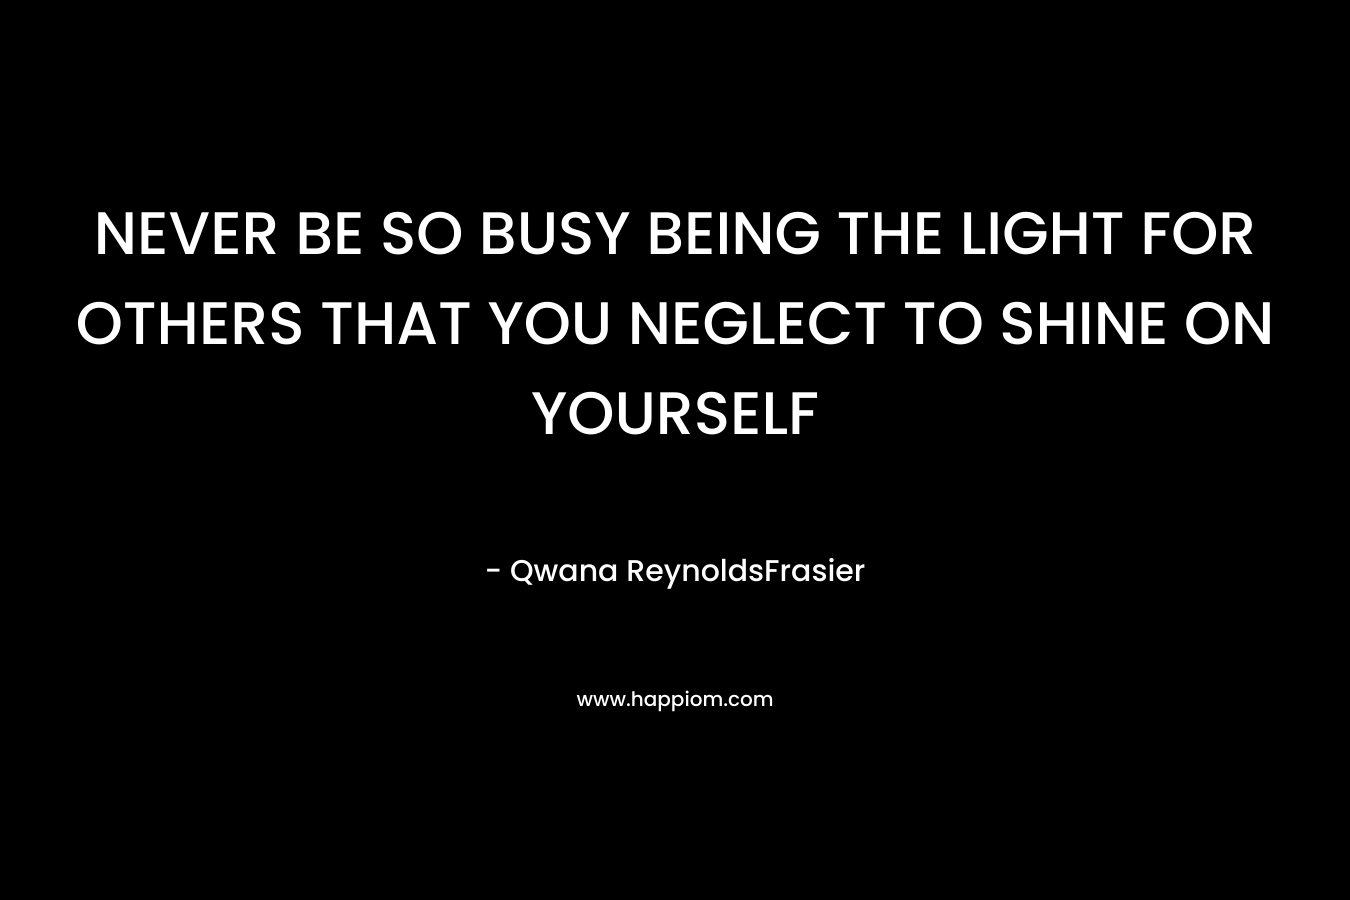 NEVER BE SO BUSY BEING THE LIGHT FOR OTHERS THAT YOU NEGLECT TO SHINE ON YOURSELF  – Qwana ReynoldsFrasier